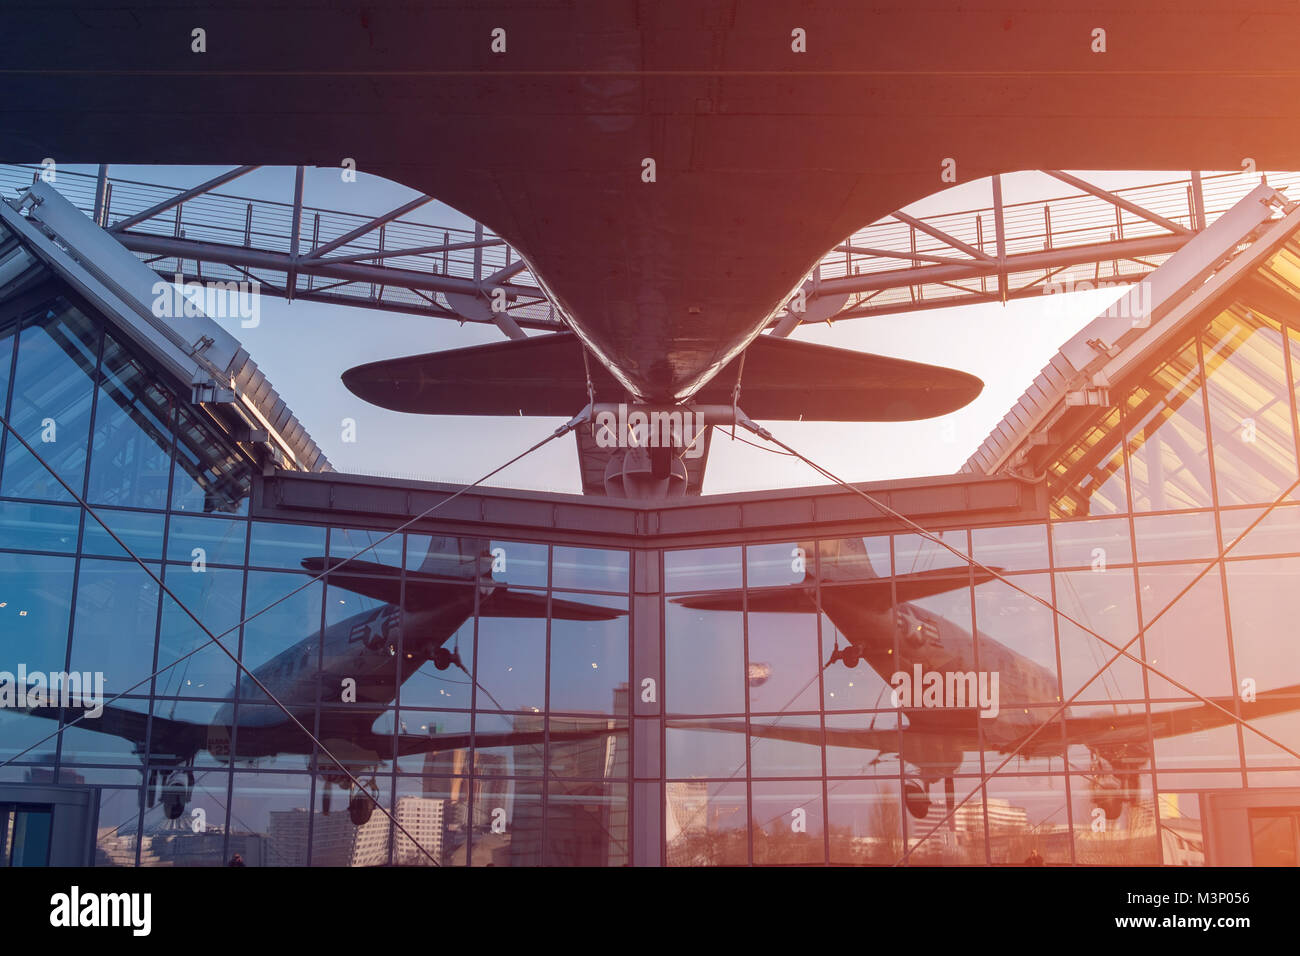 Berlin, Germany - February, 2018: Airplane and exterior of the German Museum of Technology (Deutsche Technikmuseum Berlin (DTMB)) Stock Photo